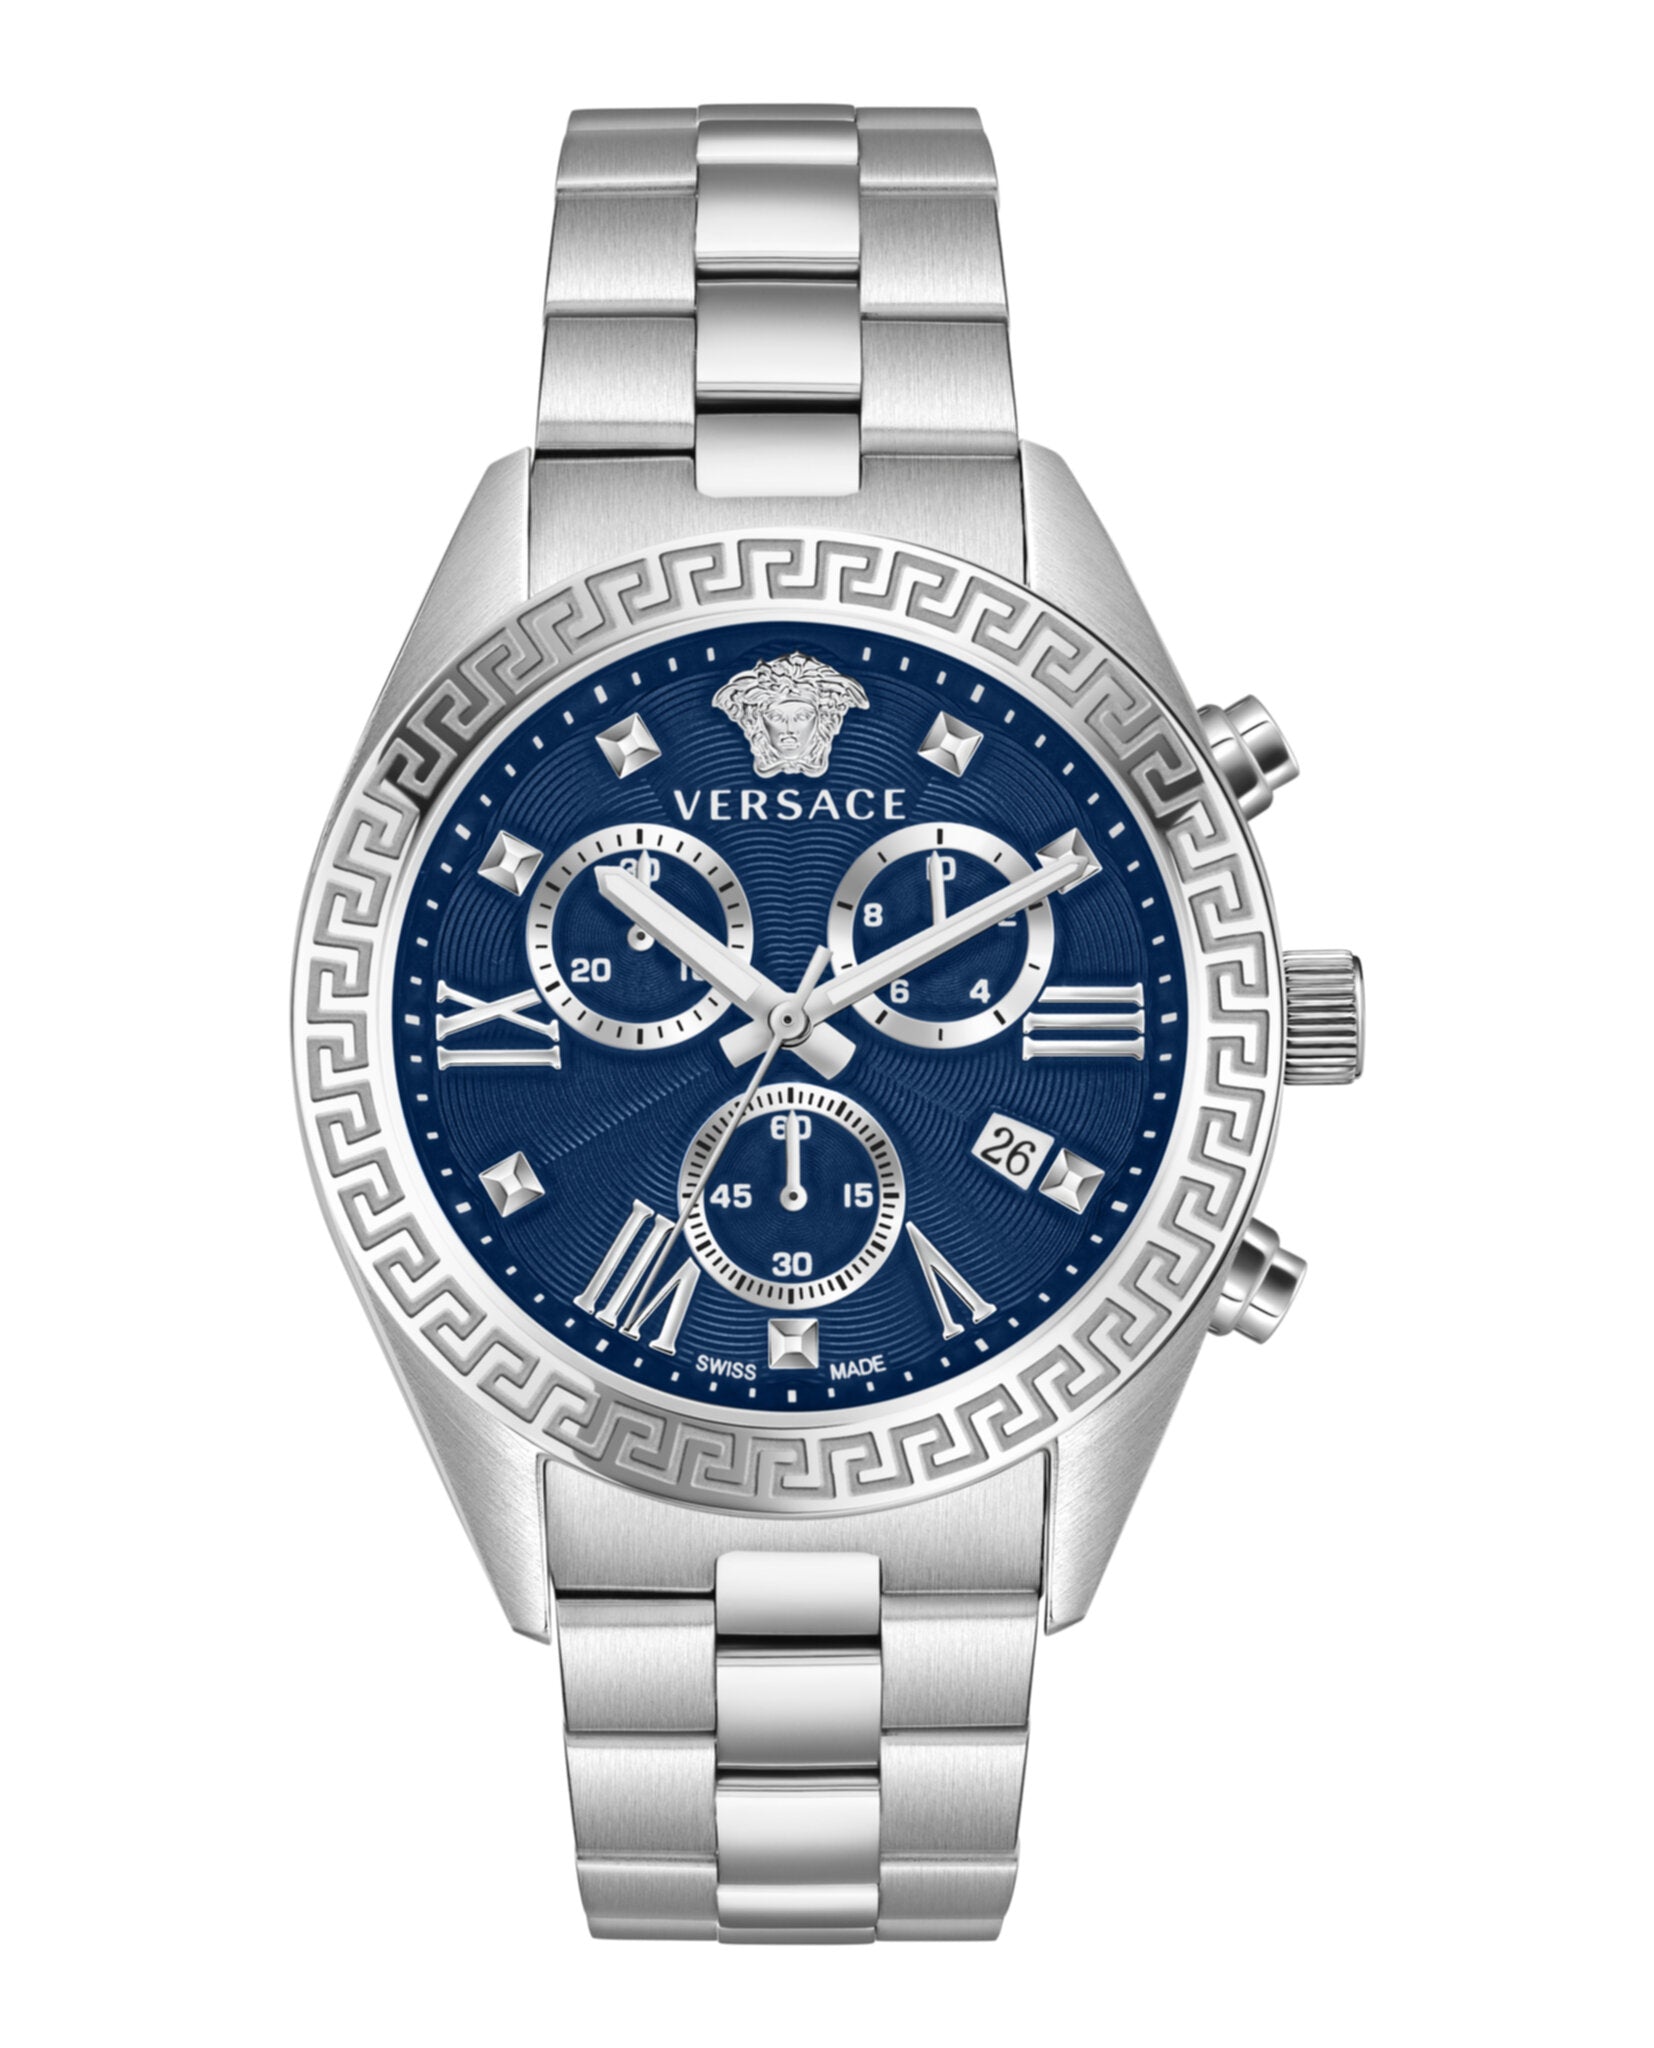 Time Versace – Greca Time Madaluxe MadaLuxe Watches | Chrono Womens